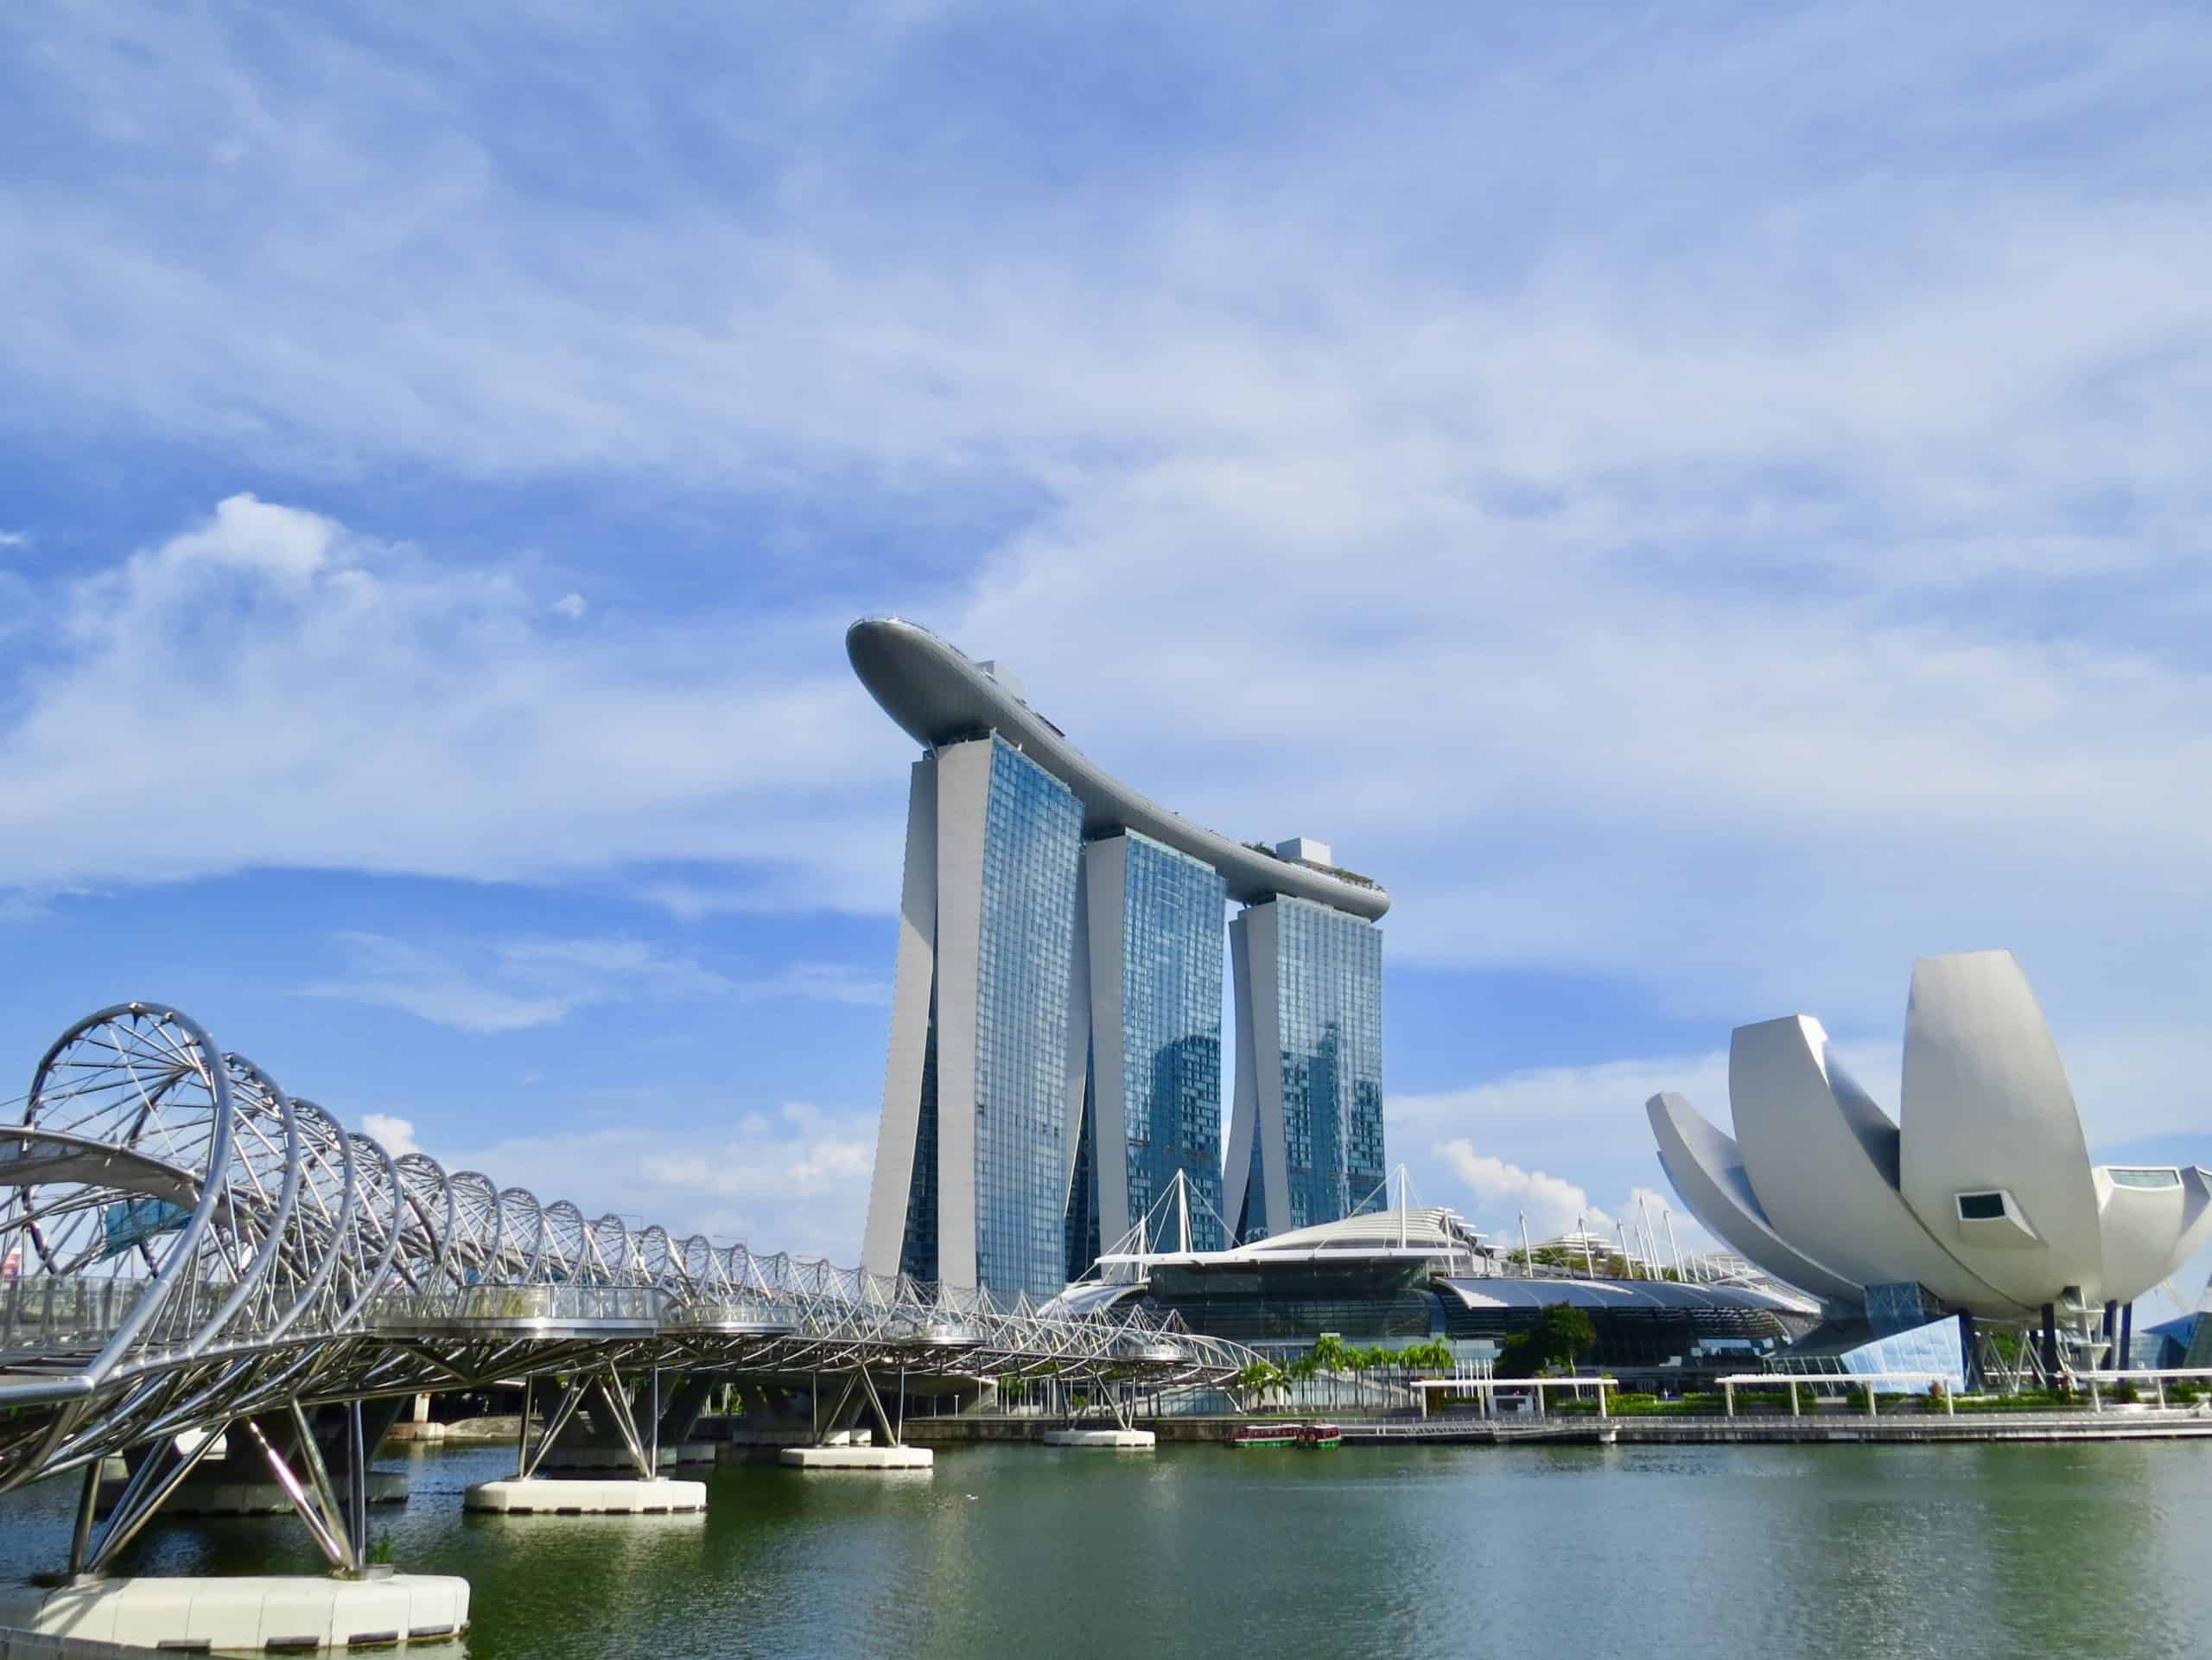 Marina Bay Sands hotel with helux bridge to the left and art science museum to the right